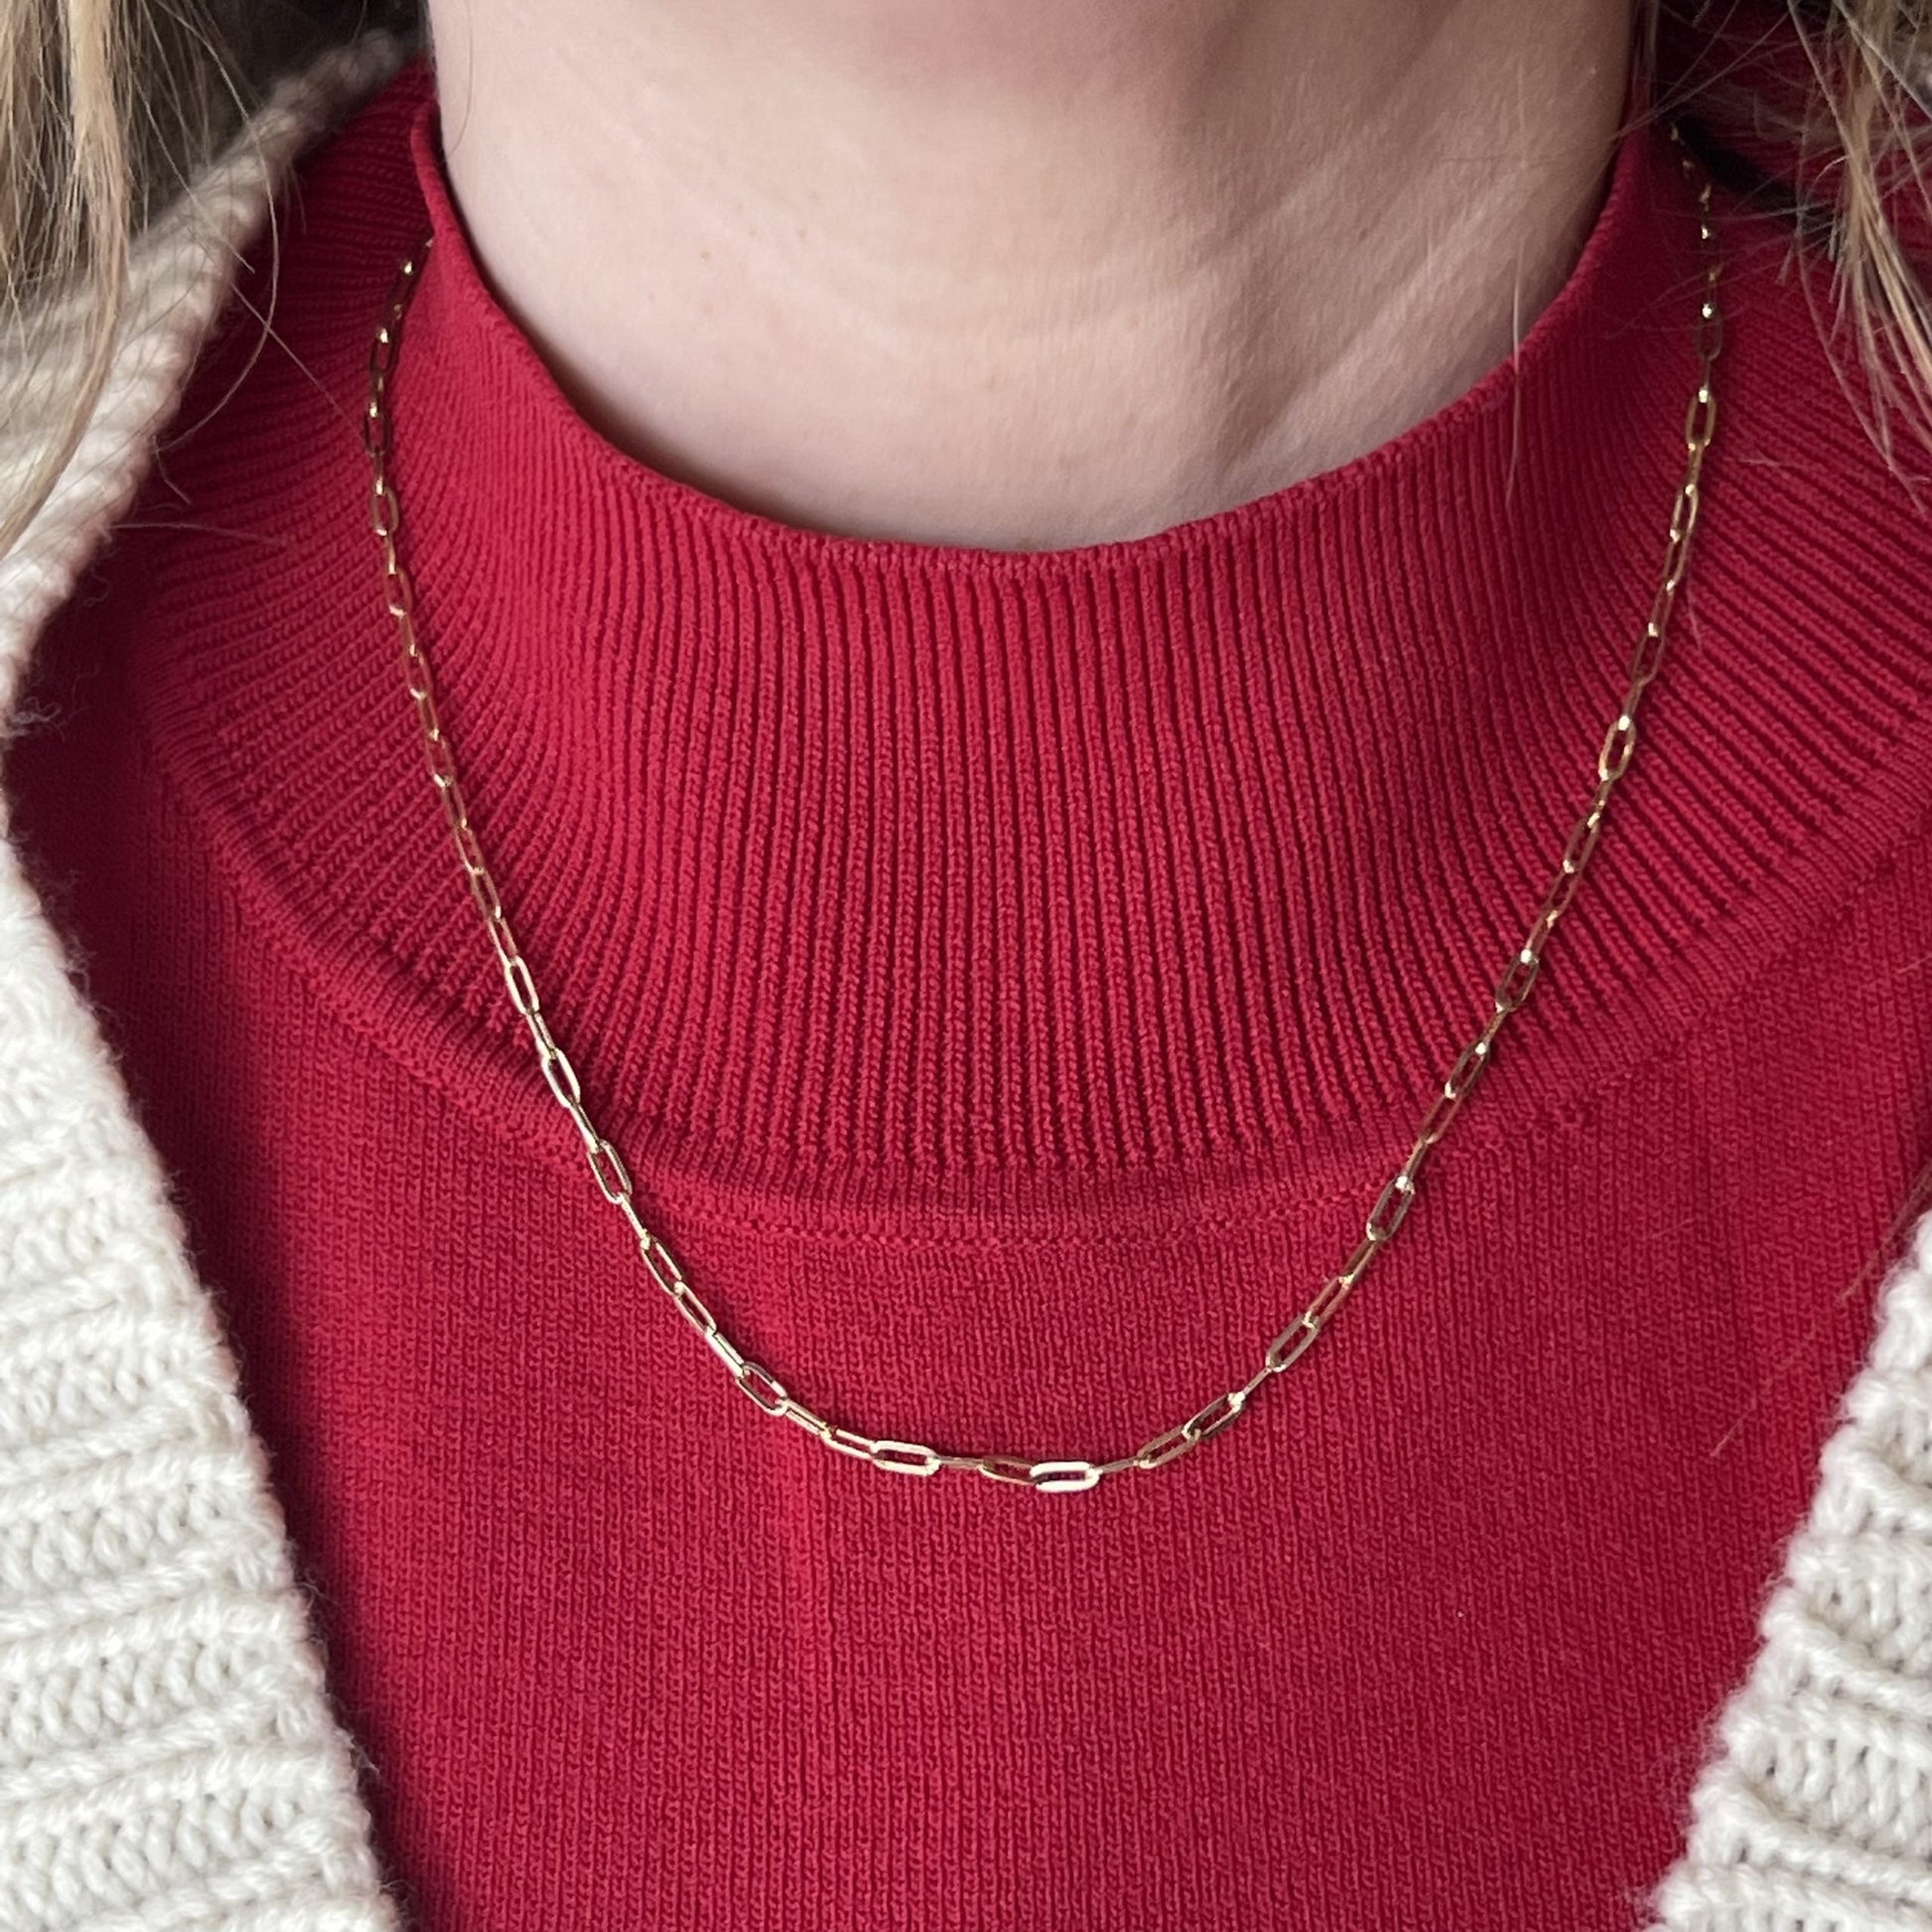 18 Inch Classic Paperclip Chain Necklace in 14k Yellow Gold